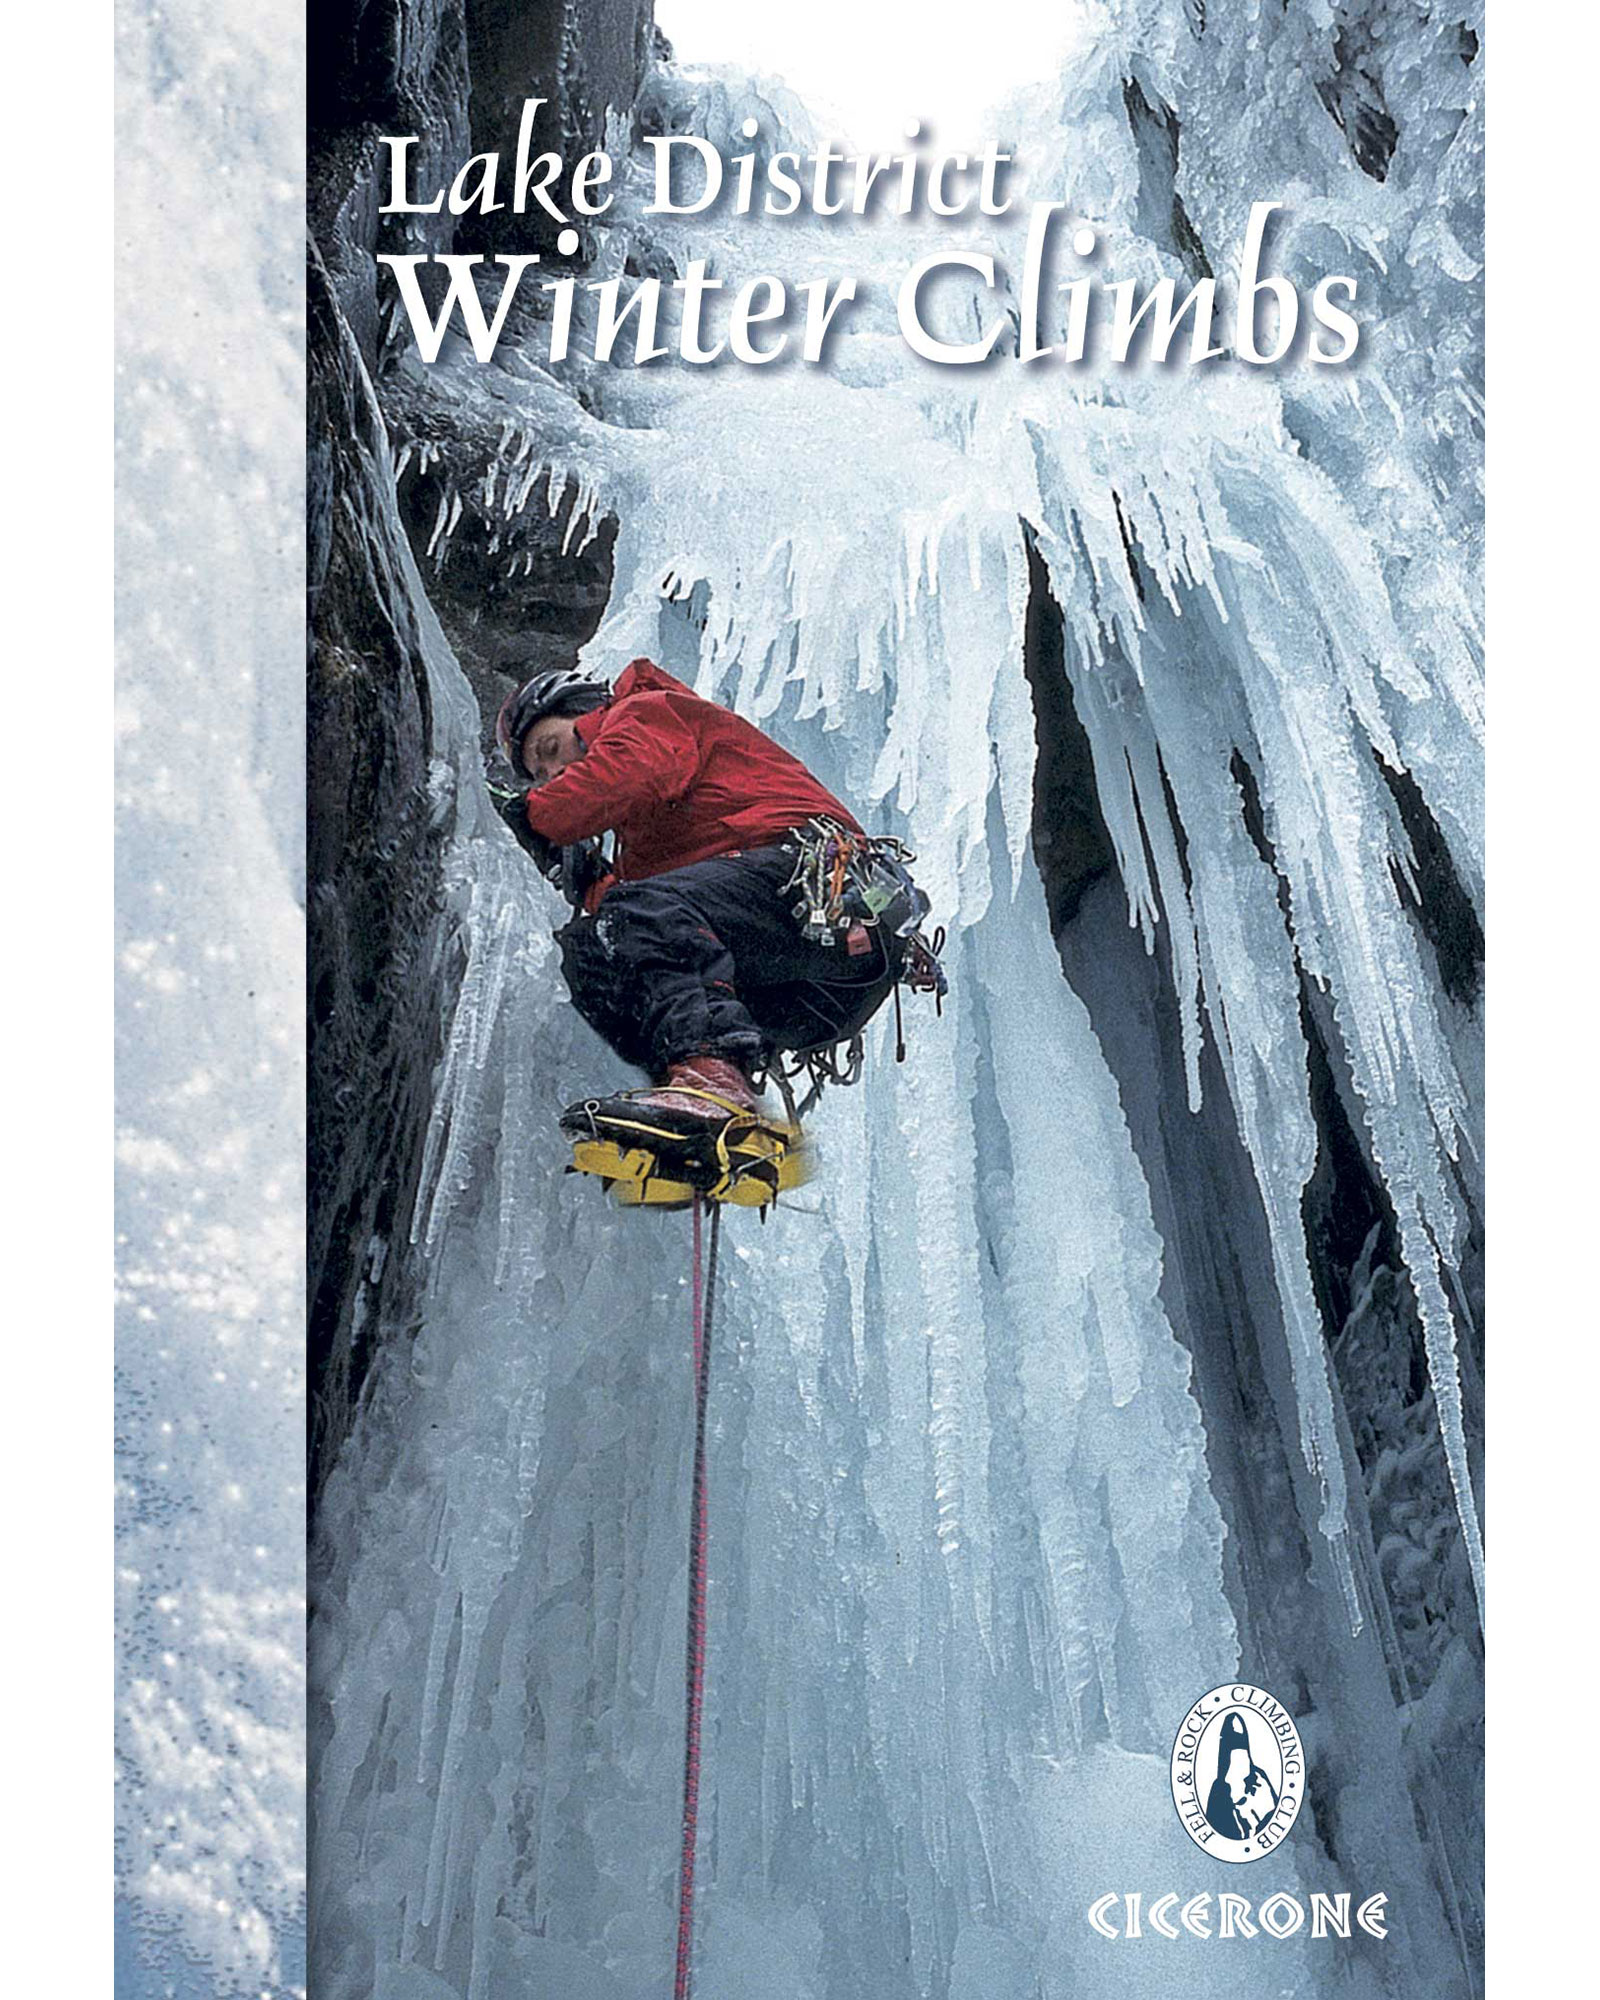 Cicerone Lake District Winter Climbs Guide Book